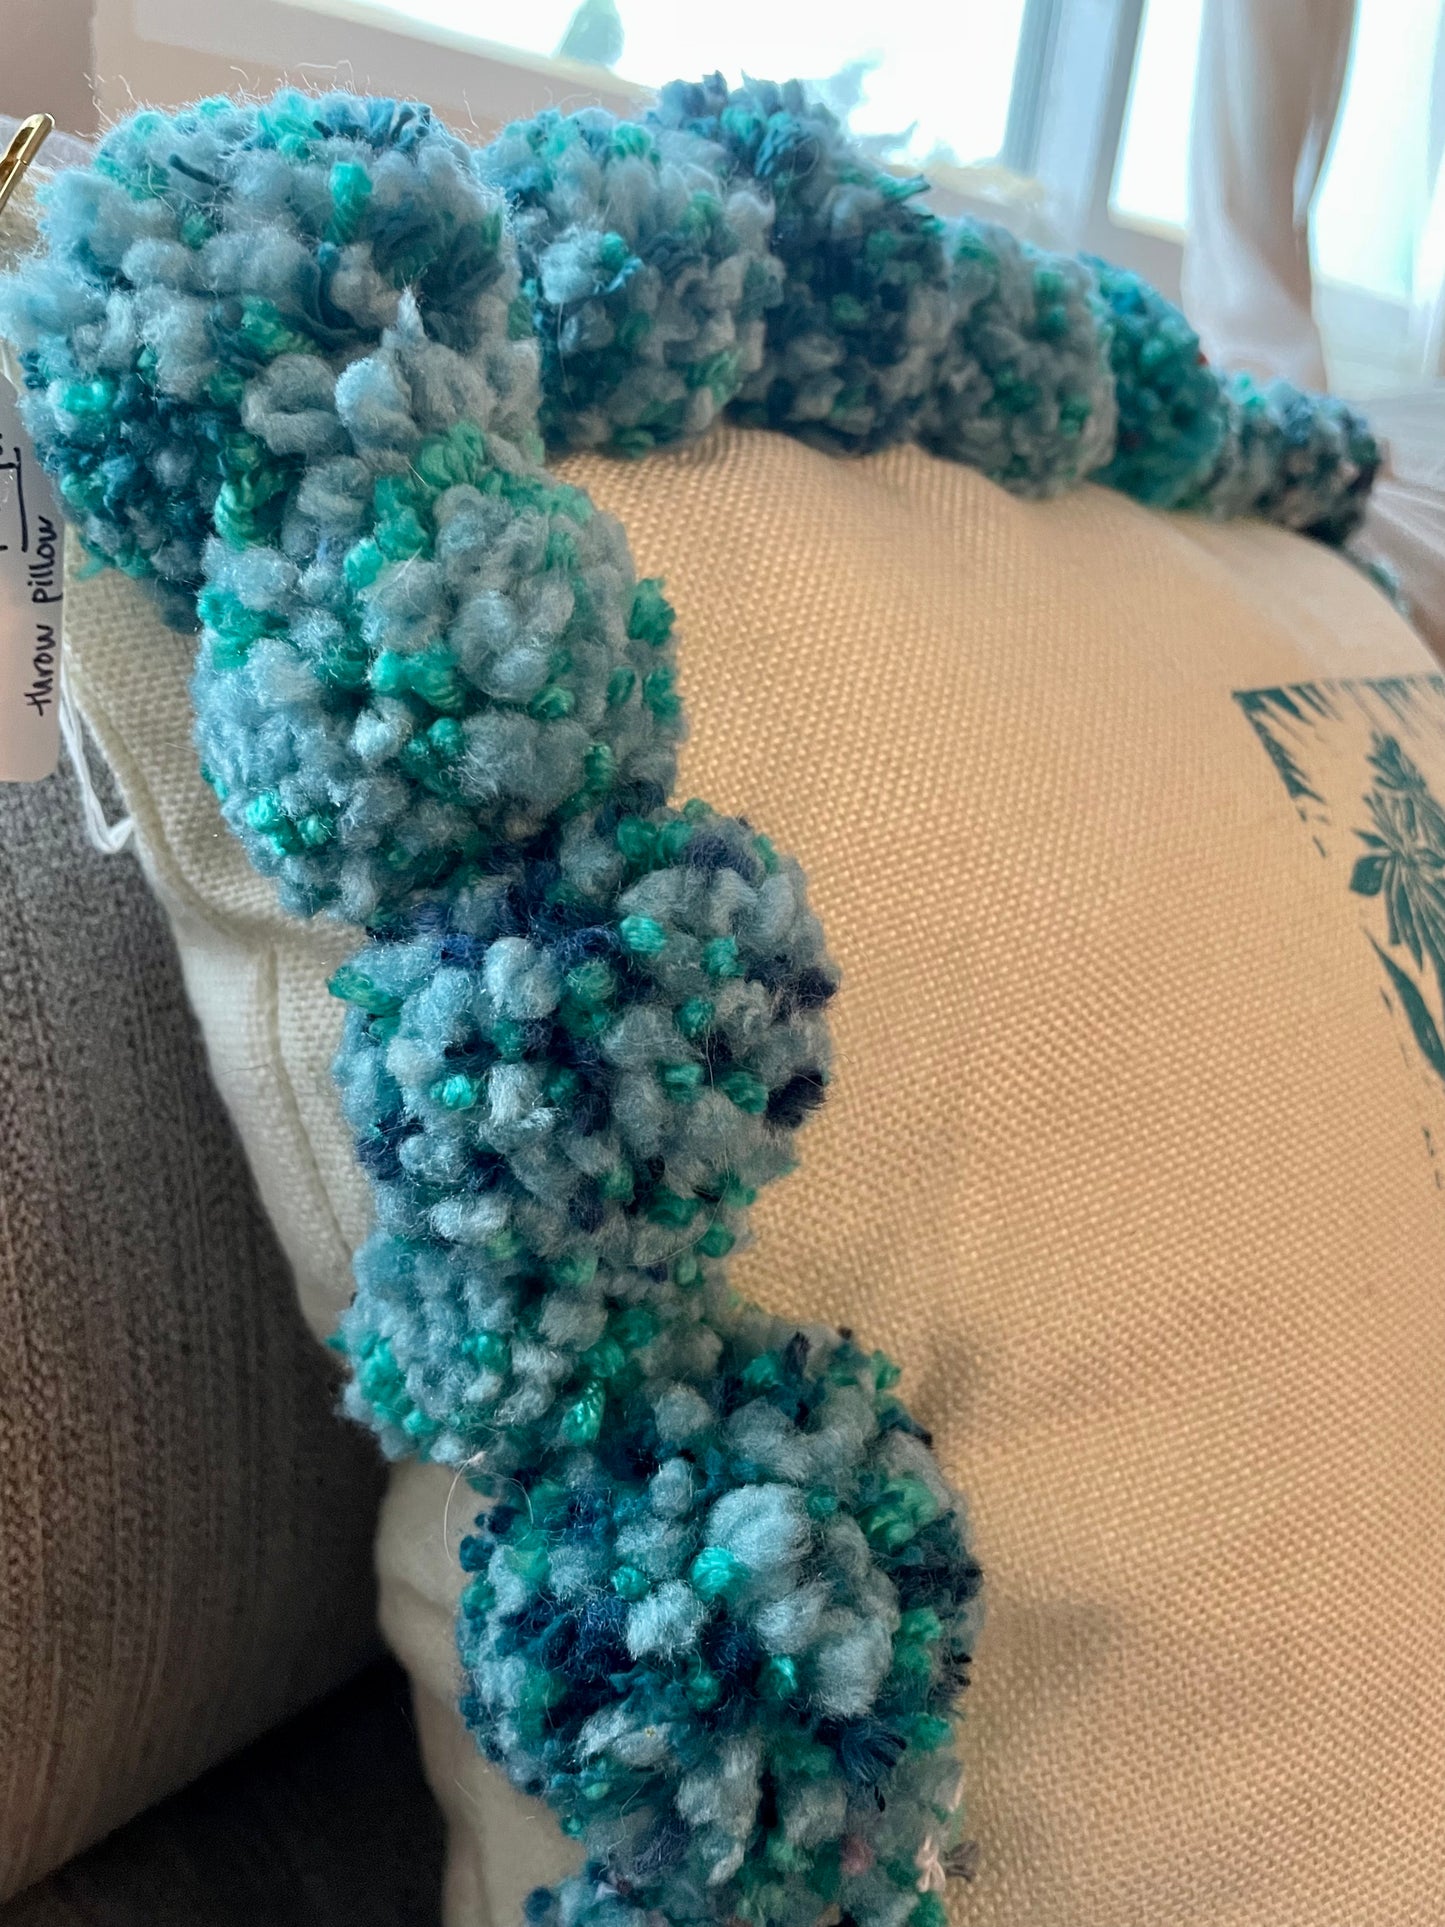 Fragile Masculinity Hand-Printed Teal Pillow with Handmade Pom-Poms